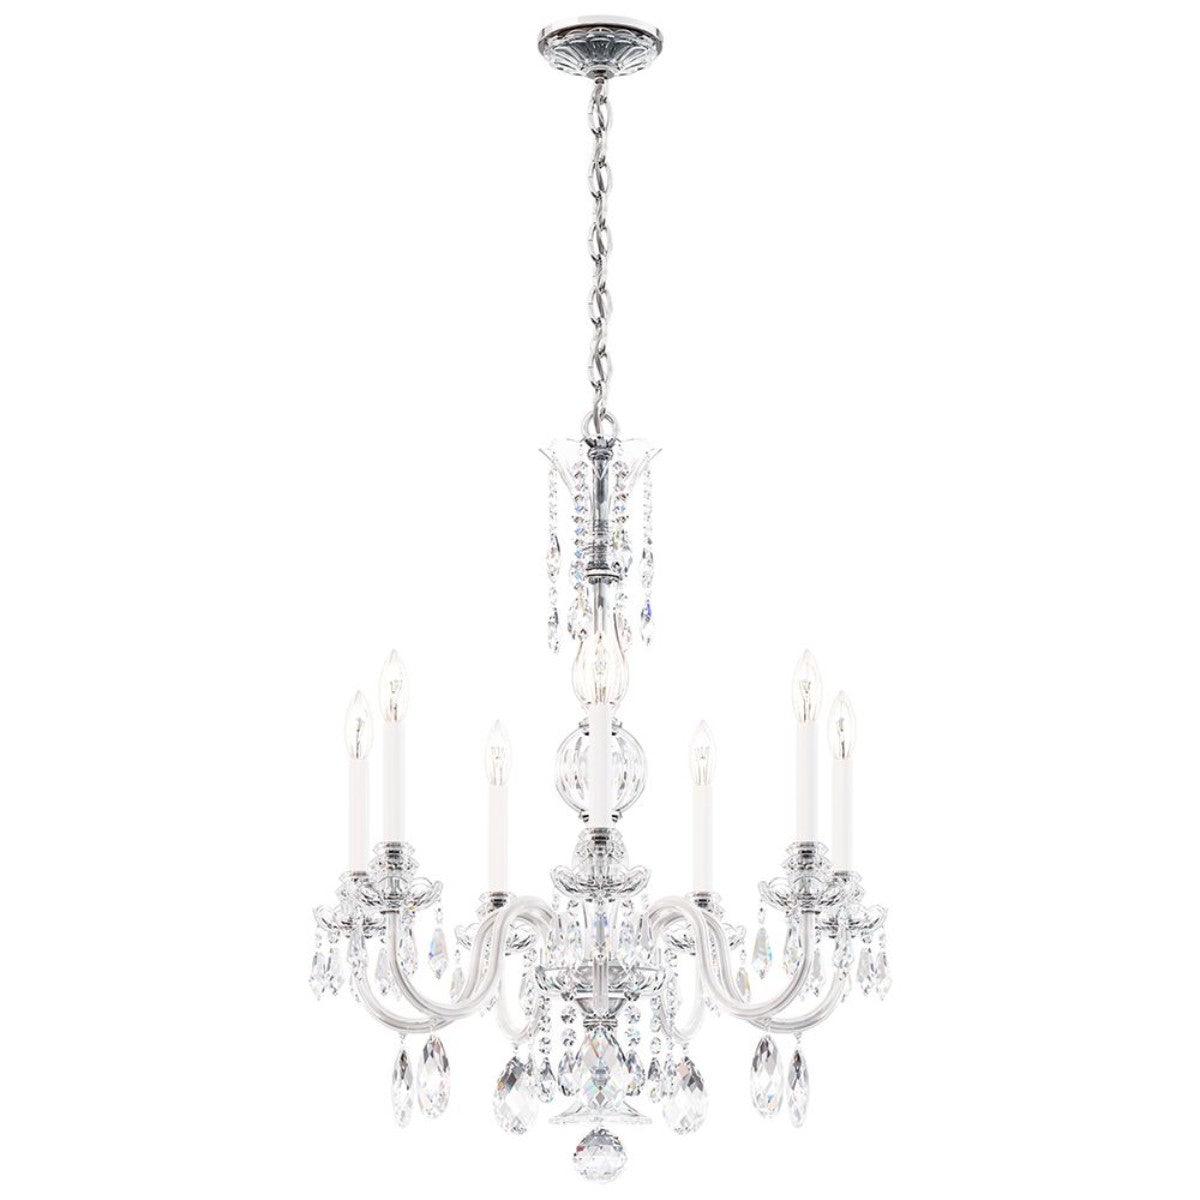 Hamilton Nouveau 7 Light Silver Chandelier with Clear Heritage Crystals